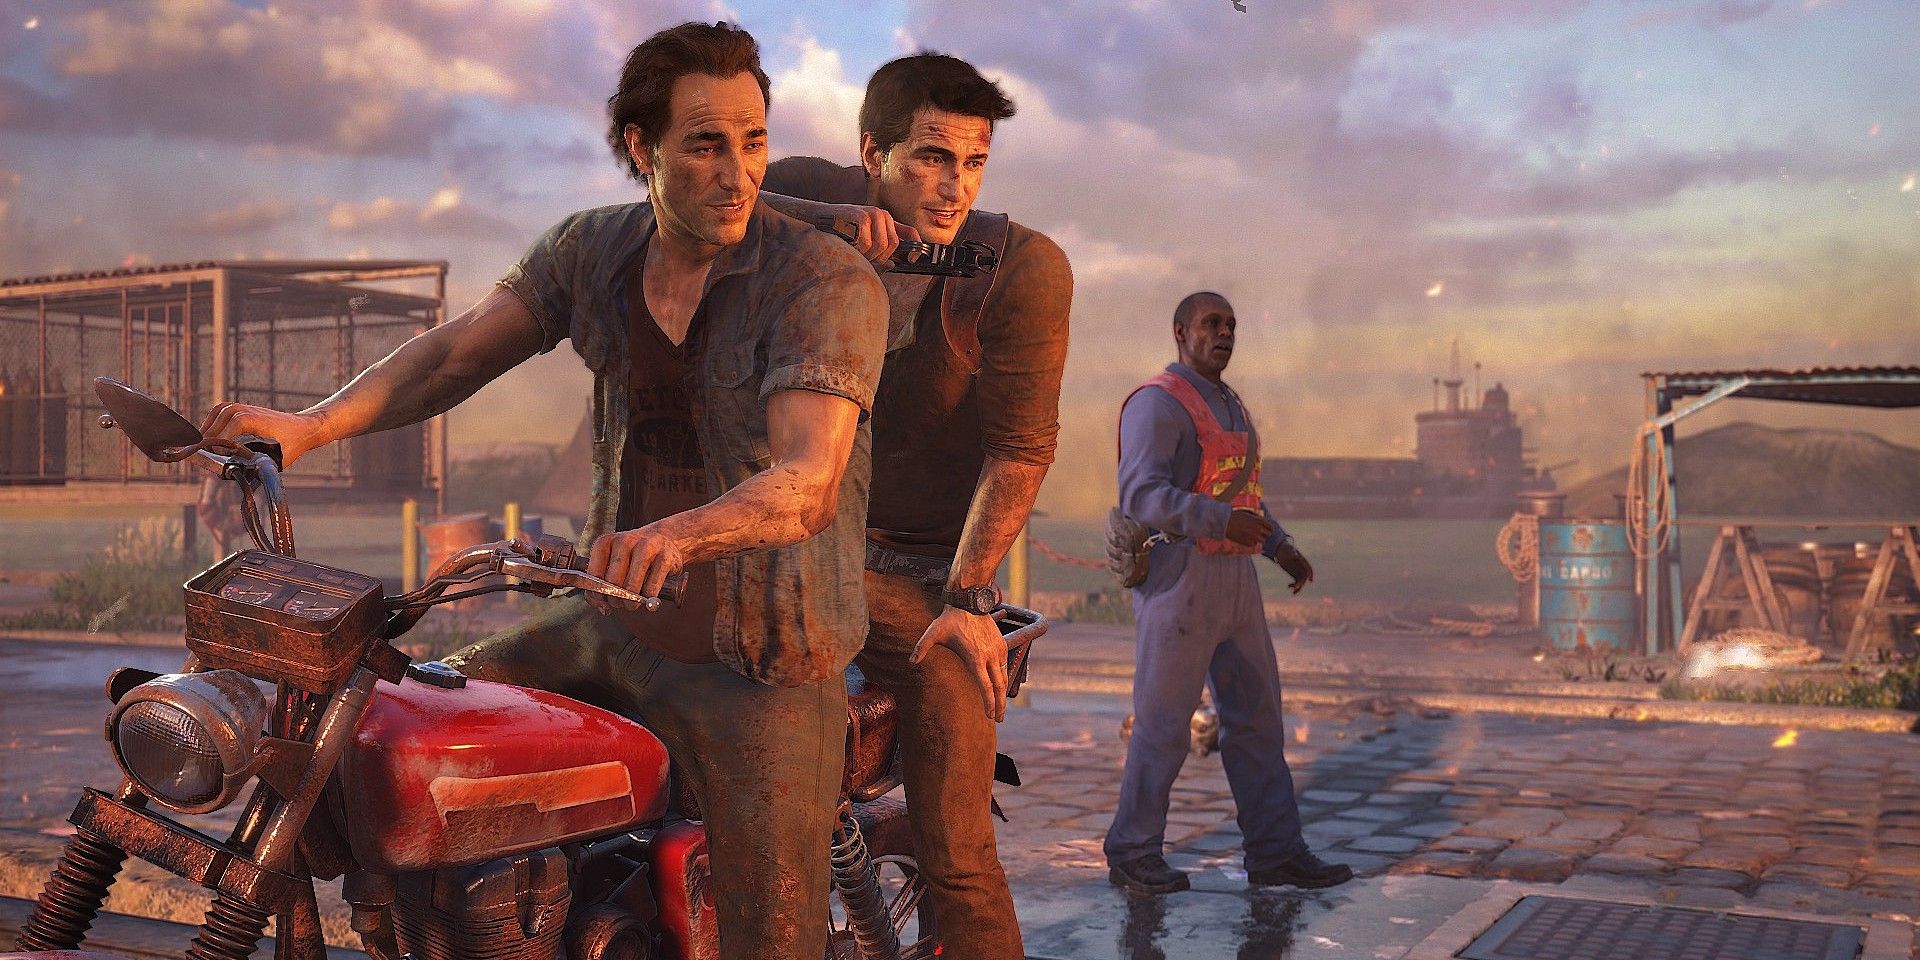 Uncharted 4: A Thief's End PC Version Is On The Way – The Boss